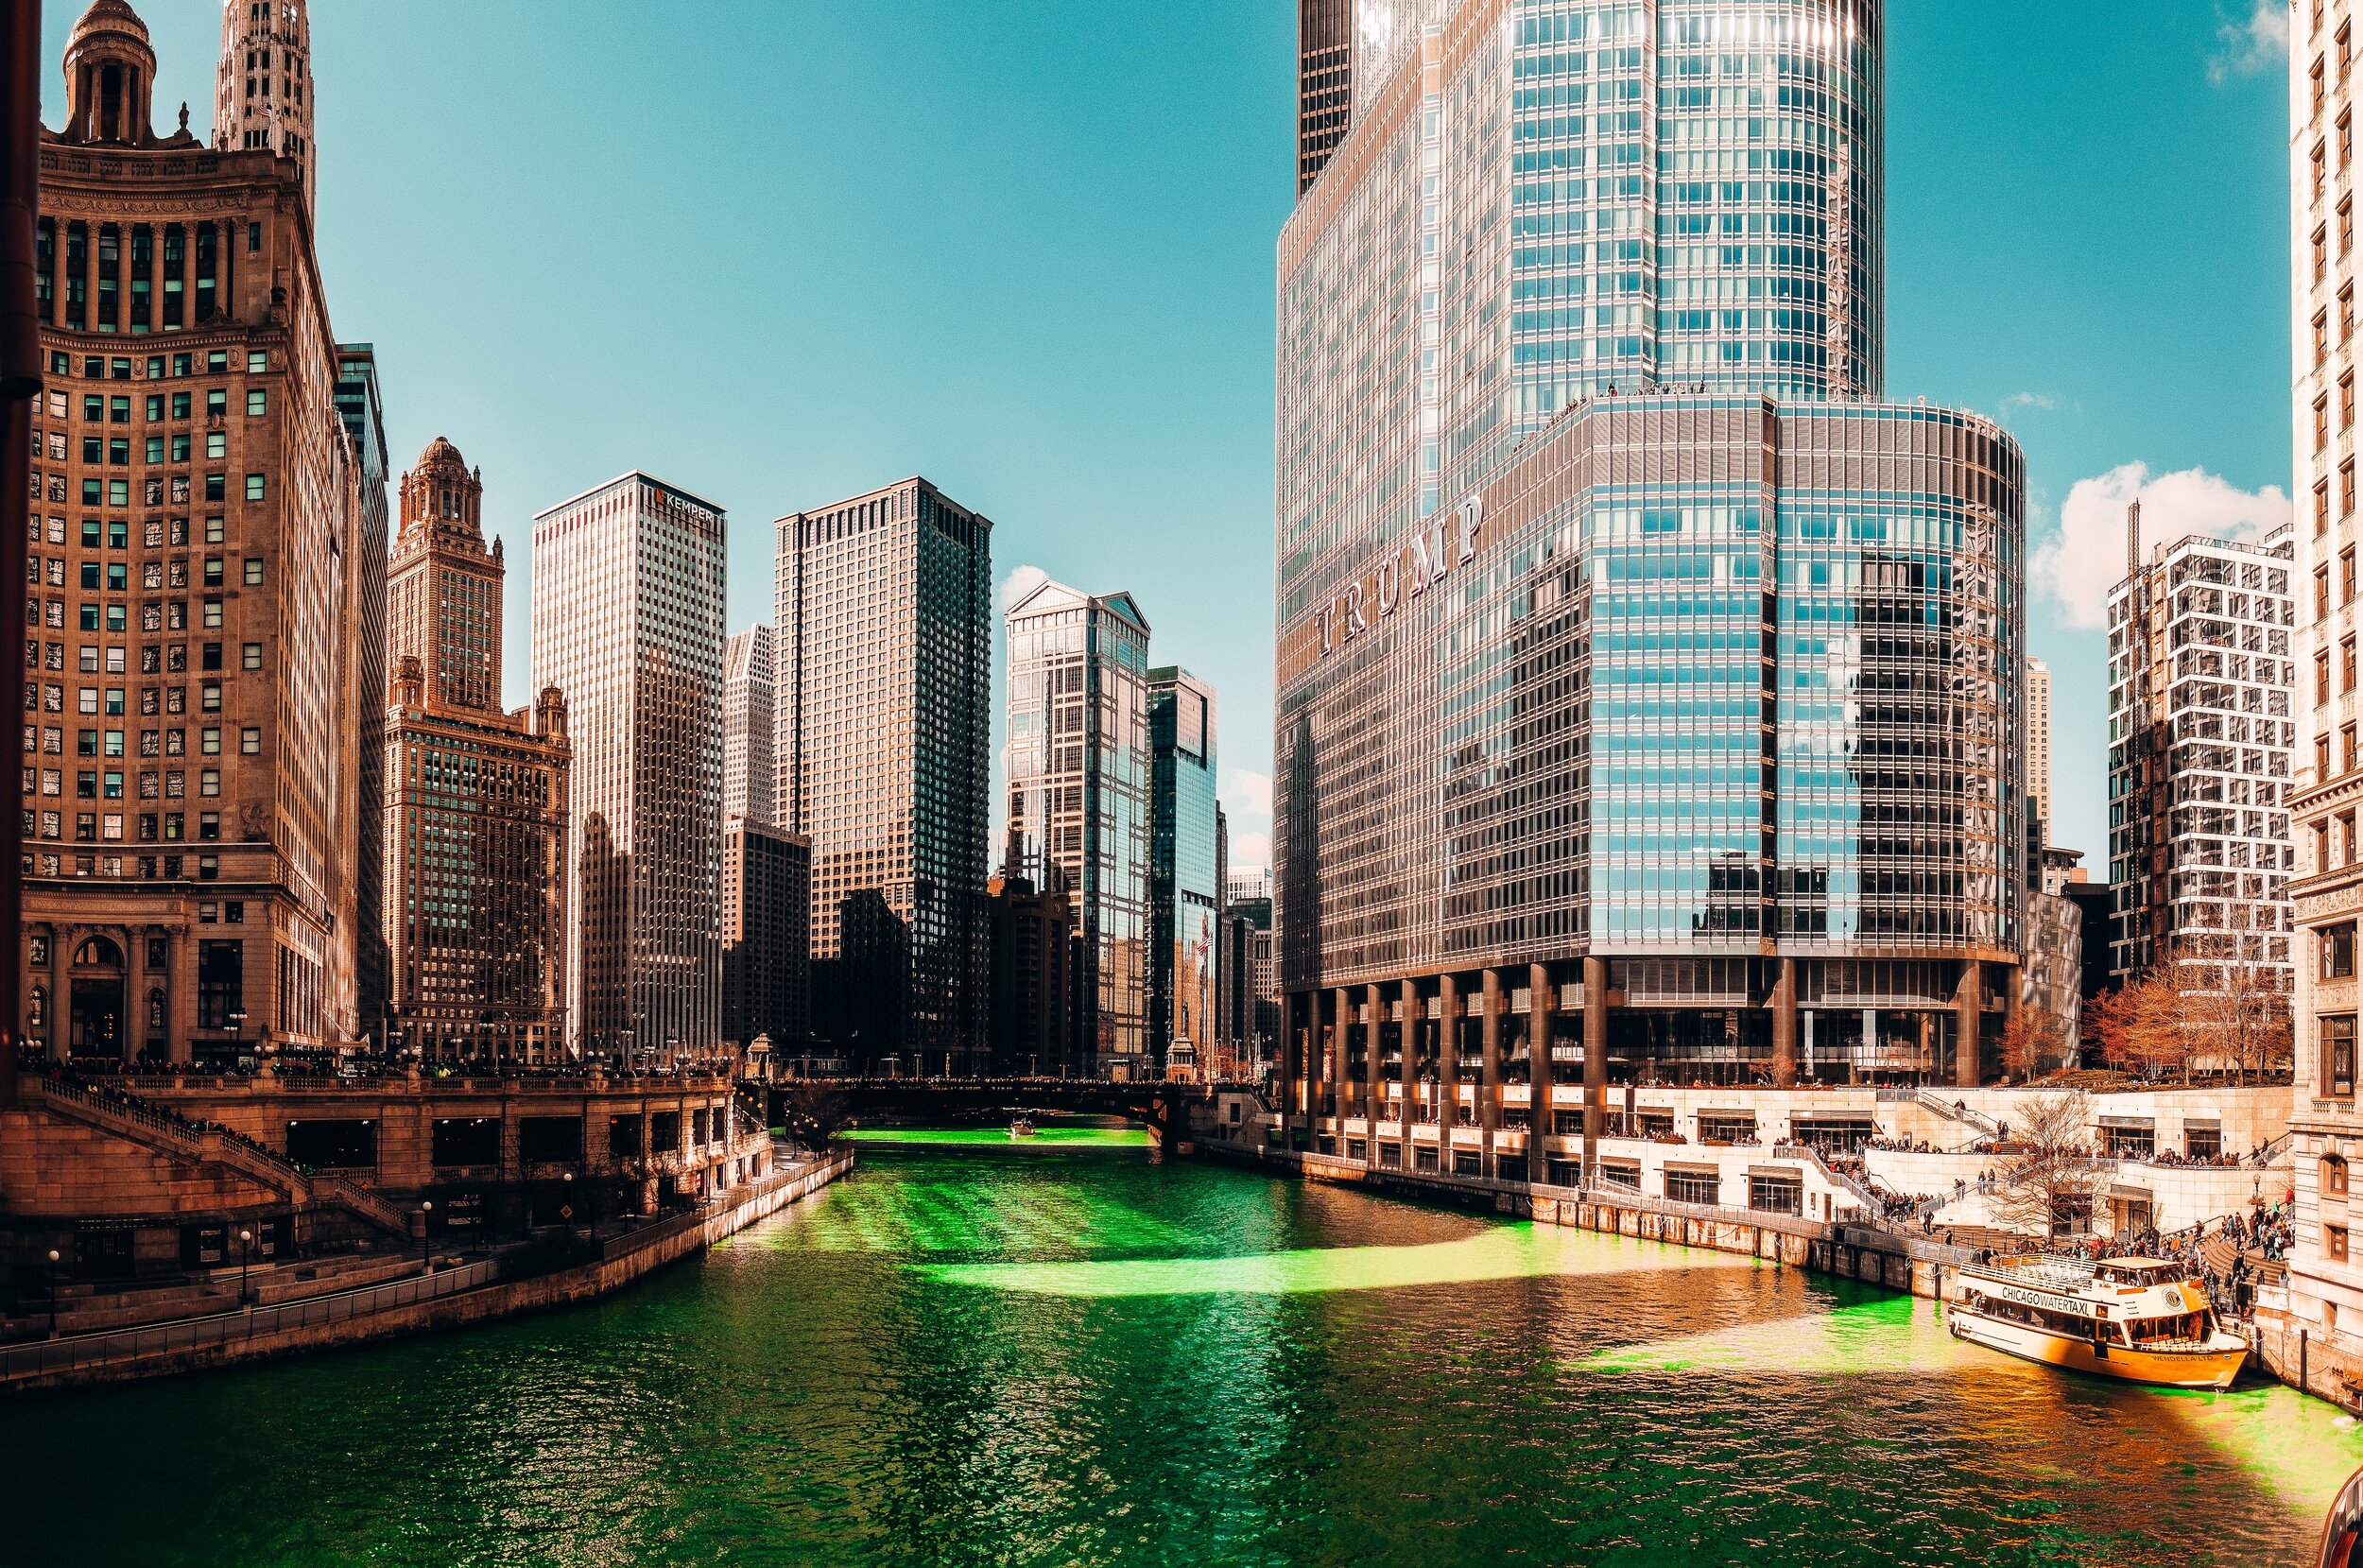 Alison visits Chicago for St. Patrick's Day, where they dye the river a bright shade of emerald green in celebration of hte holiday!